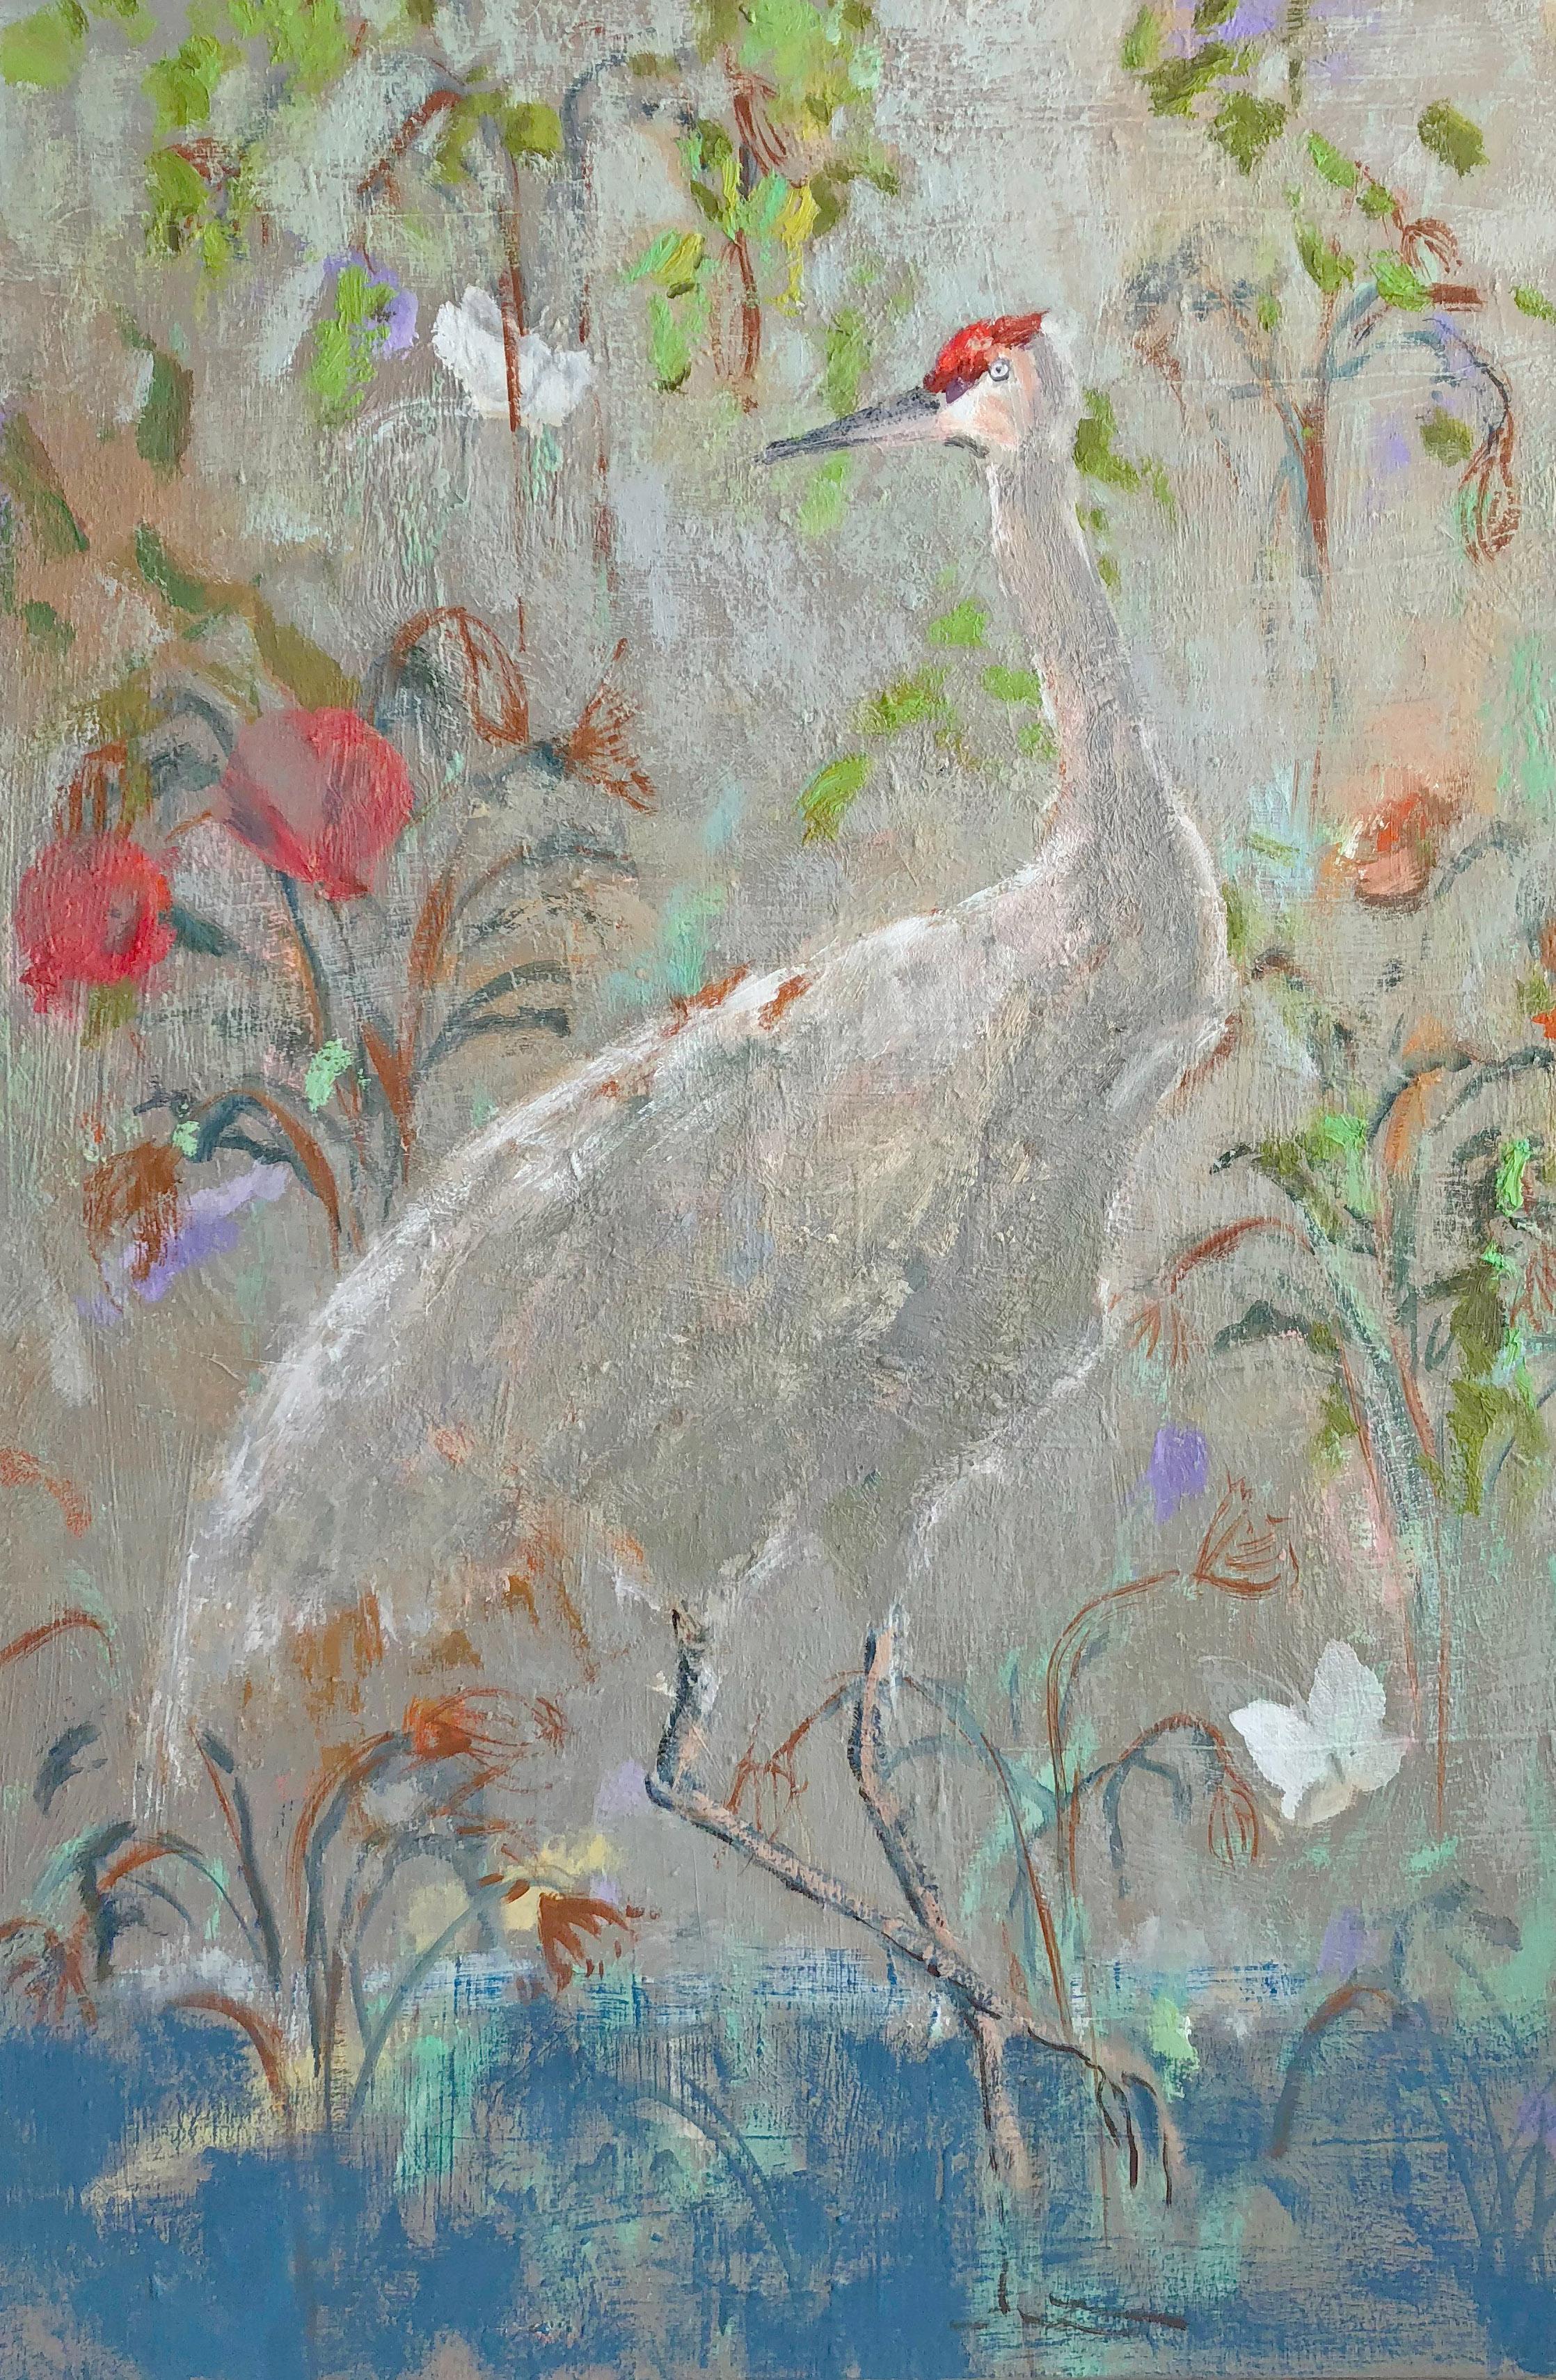 Melanie Parke Landscape Painting - Sandhill, White and Grey Bird with Multicolored Butterflies and Tropical Flowers